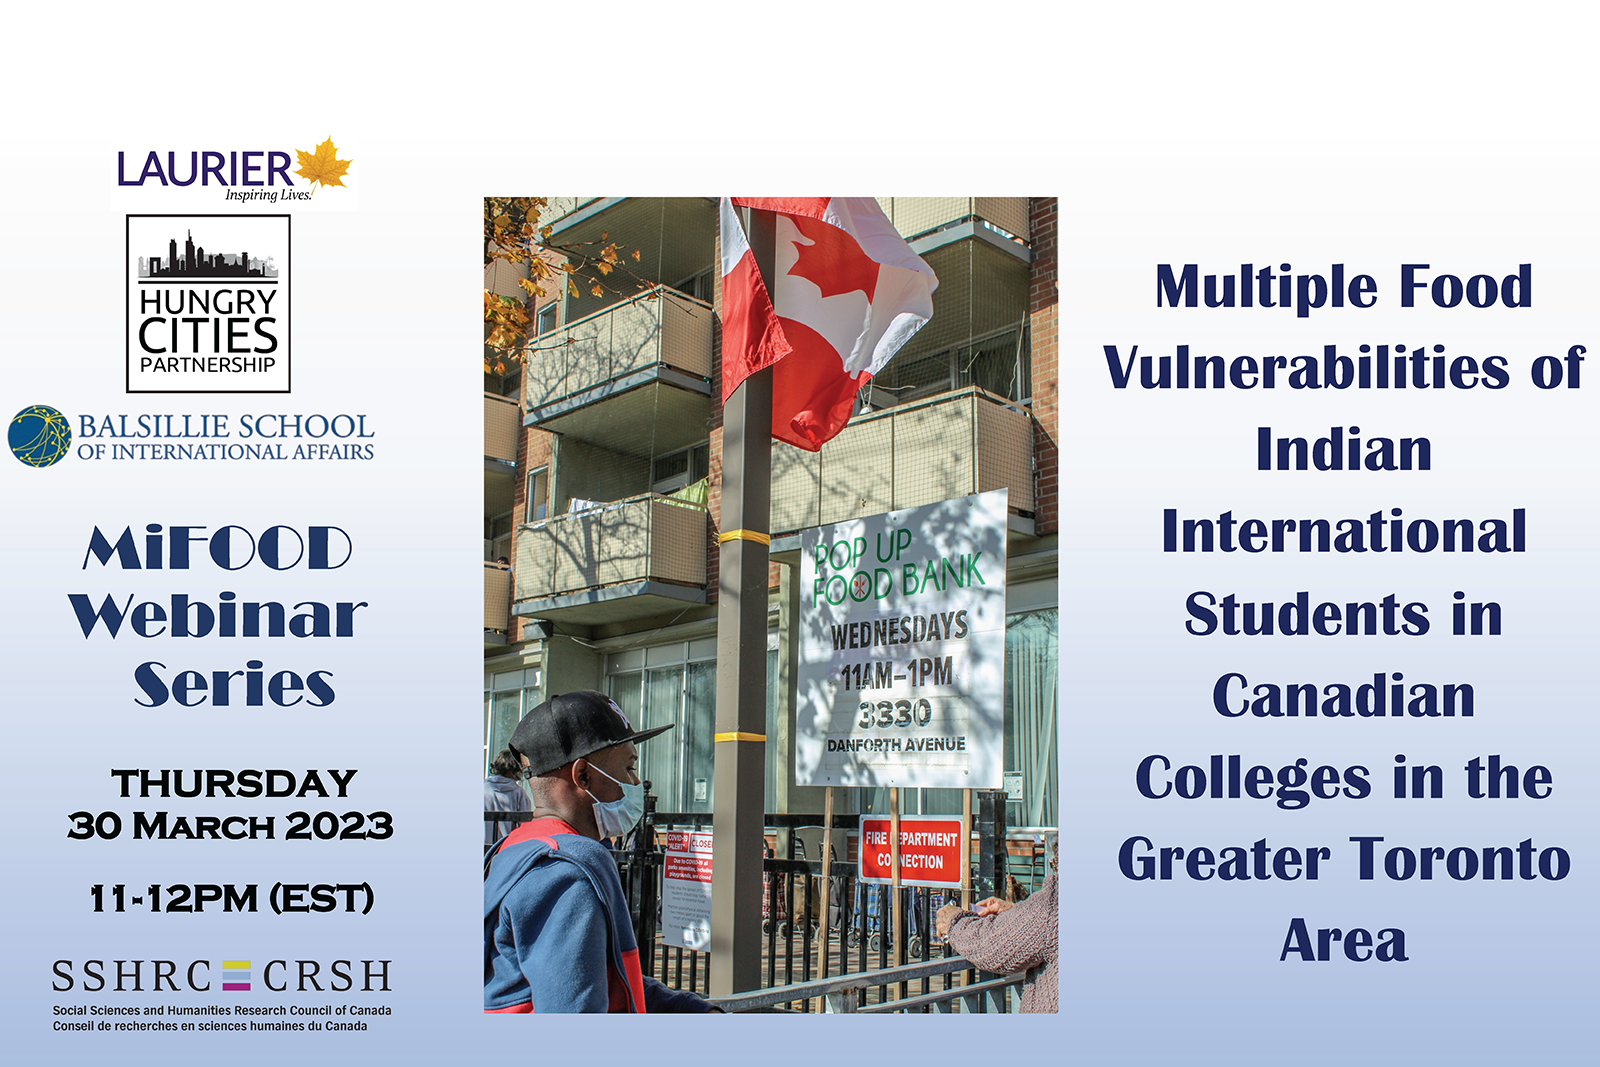 A power point slide with the title of the webinar, the partners (BSIA, Laurier, SSHRC) listed and a photo of a man standing in front of sign "pop up food banks".